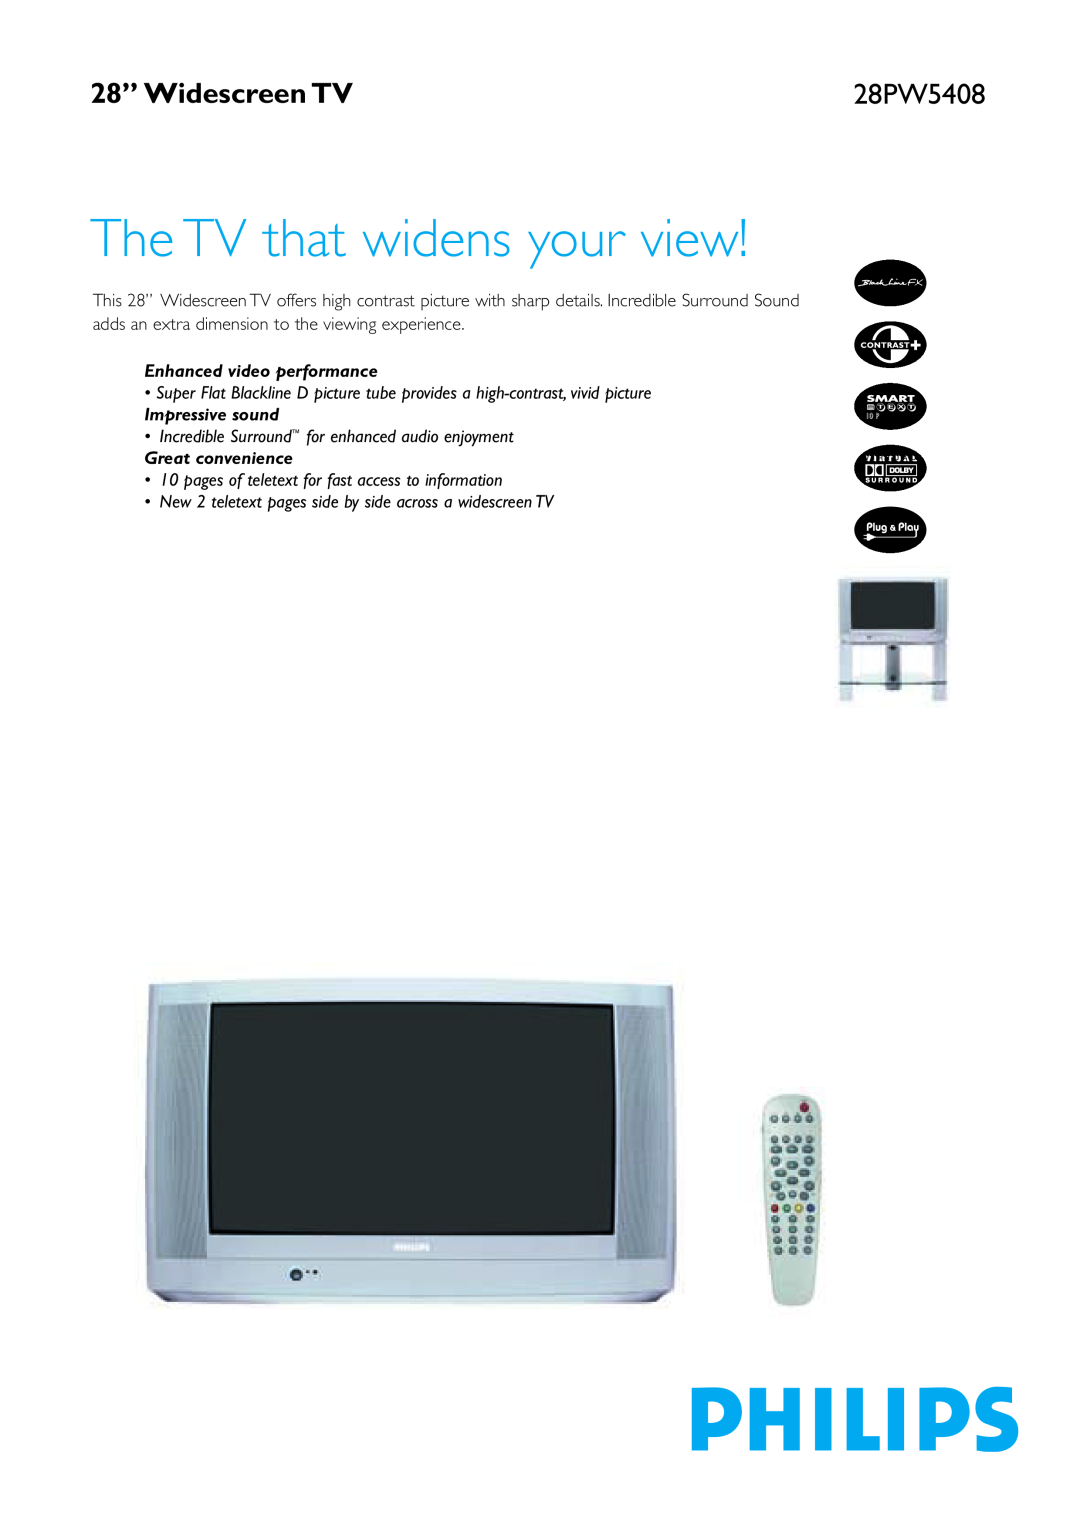 Philips 28PW5408 manual 28” Widescreen TV, The TV that widens your view, Enhanced video performance, Impressive sound 